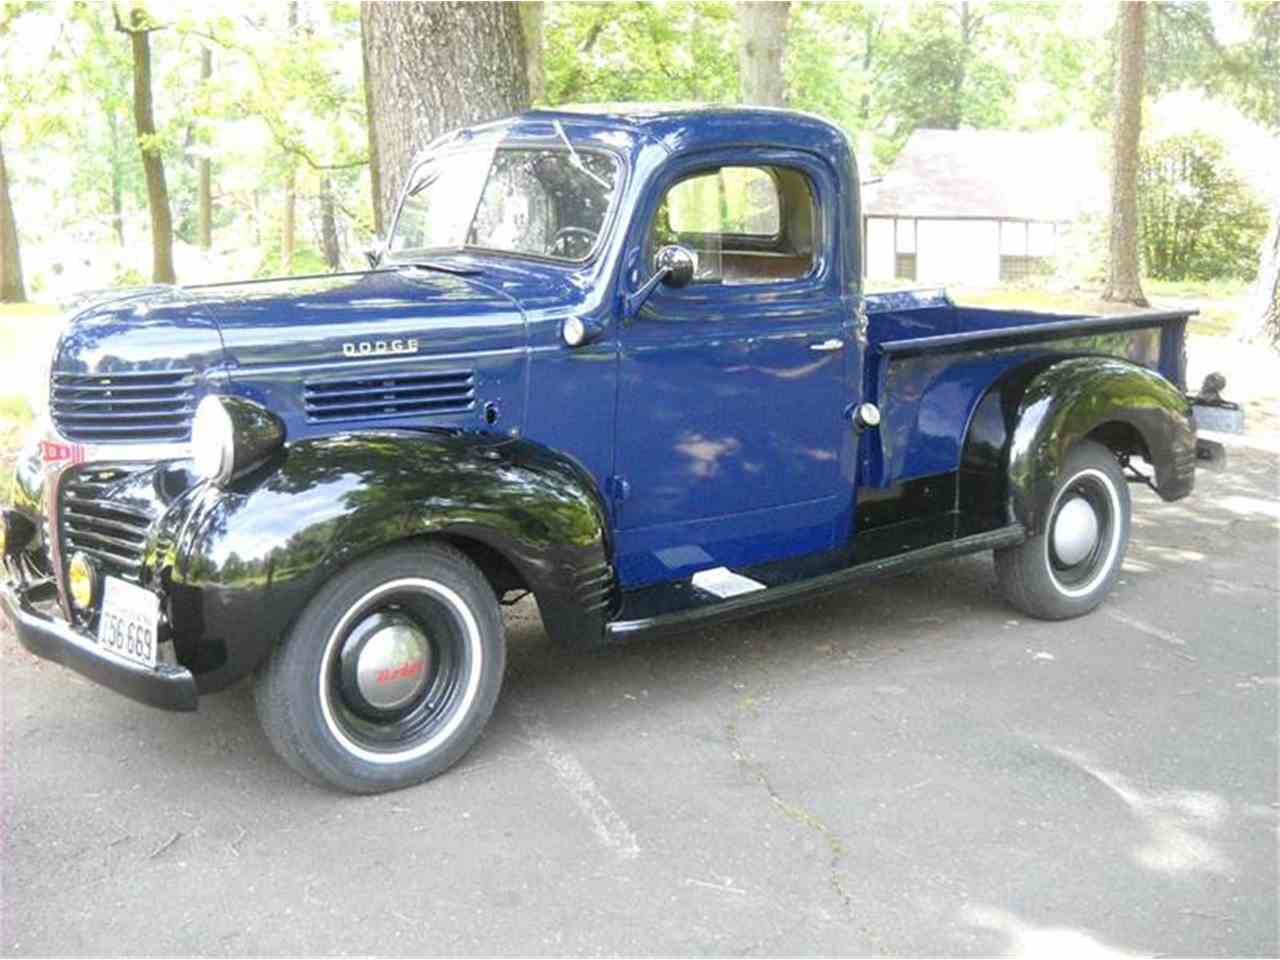 Are used 1970 pickup trucks considered vintage or antique?